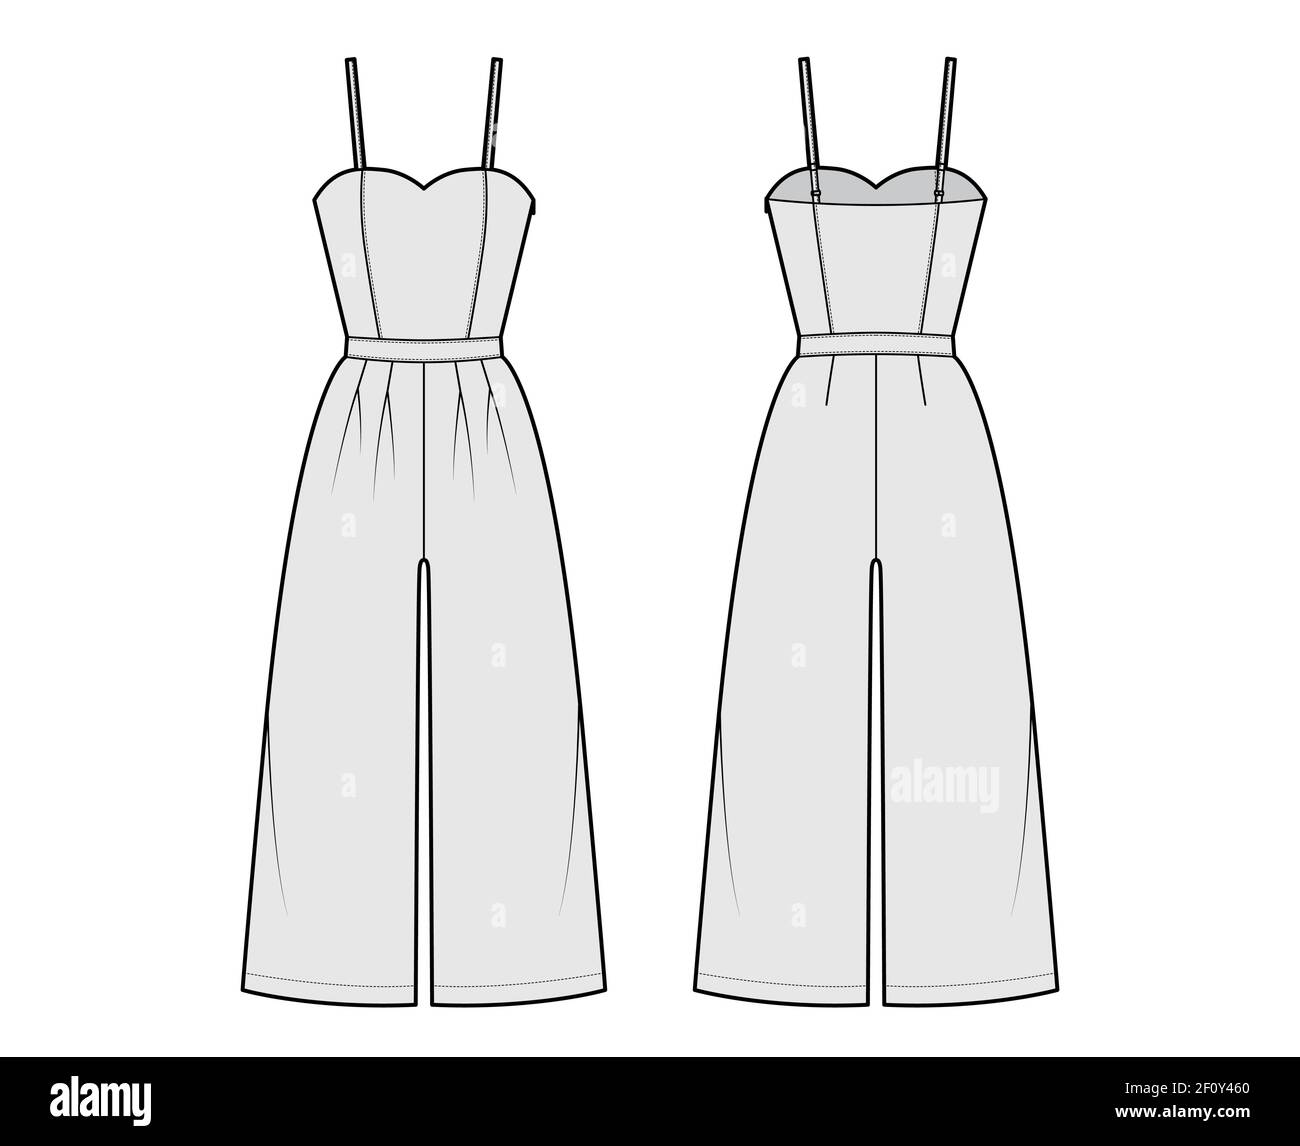 Cami jumpsuits culotte overall technical fashion illustration with ...